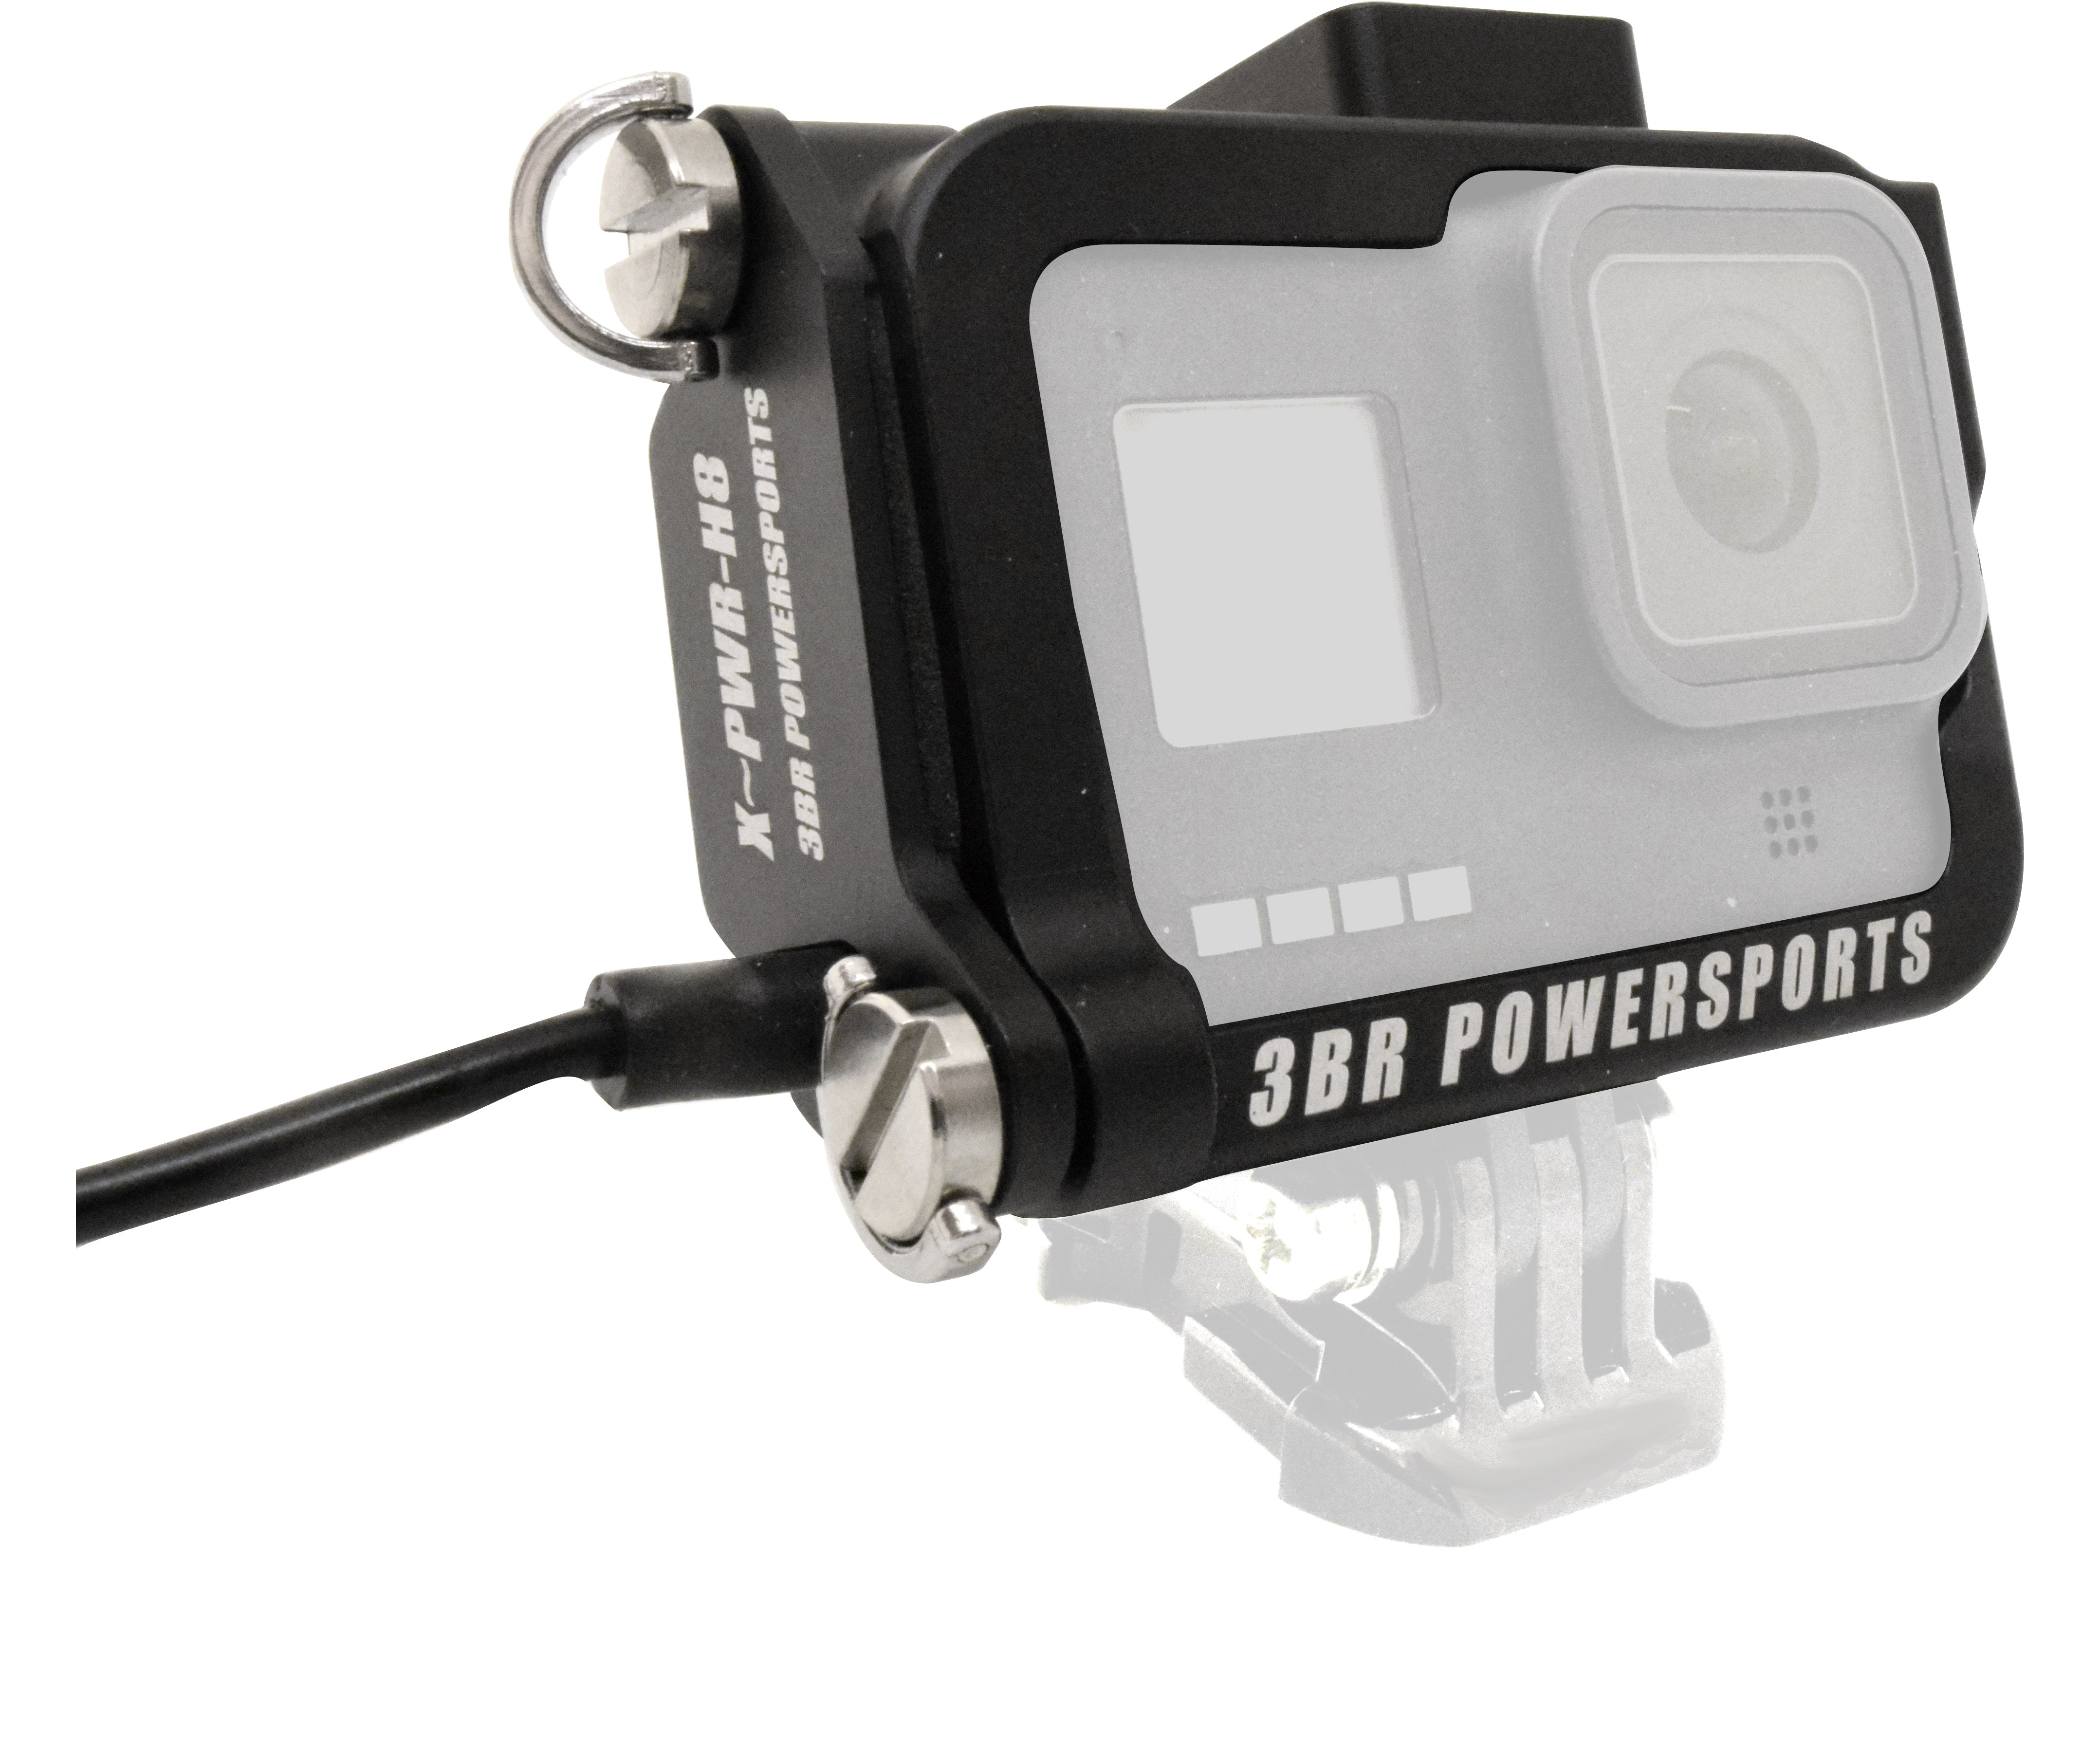 X~PWR H8 All-weather External Power Kit for GoPro HERO8 – 3BR